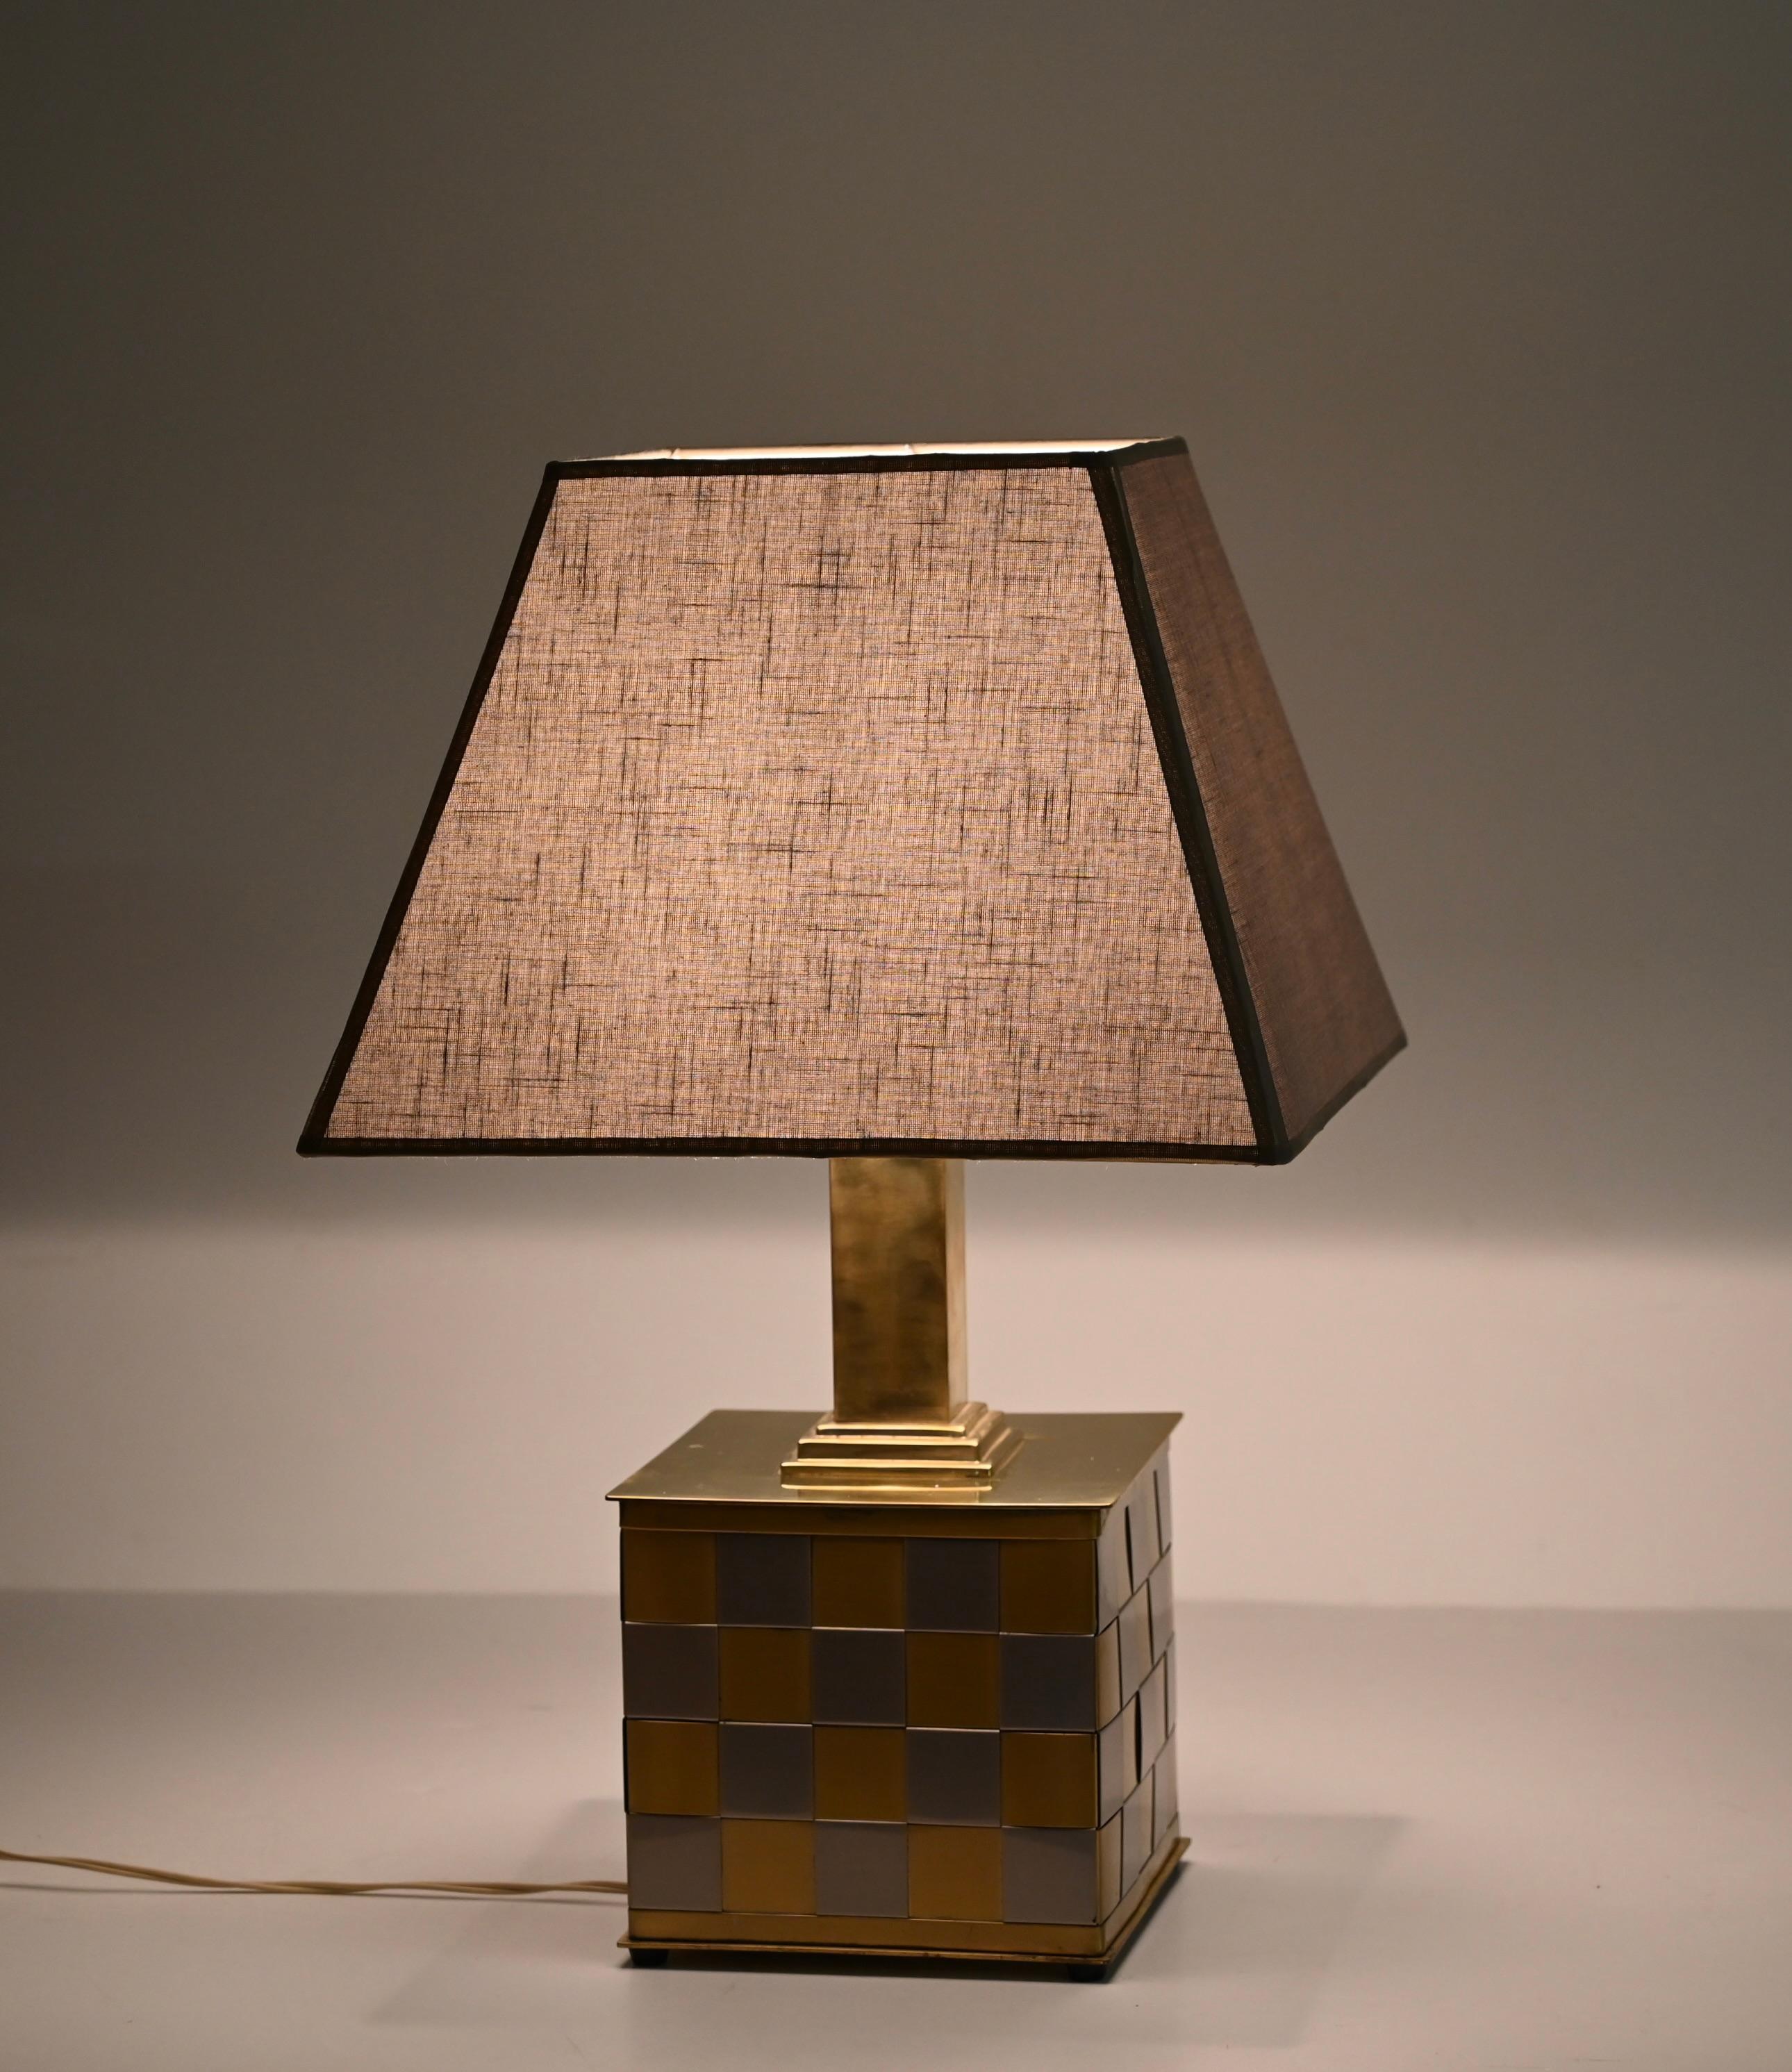 Midcentury Brass and Chrome Table Lamp, Willy Rizzo, Italy 1970s For Sale 8